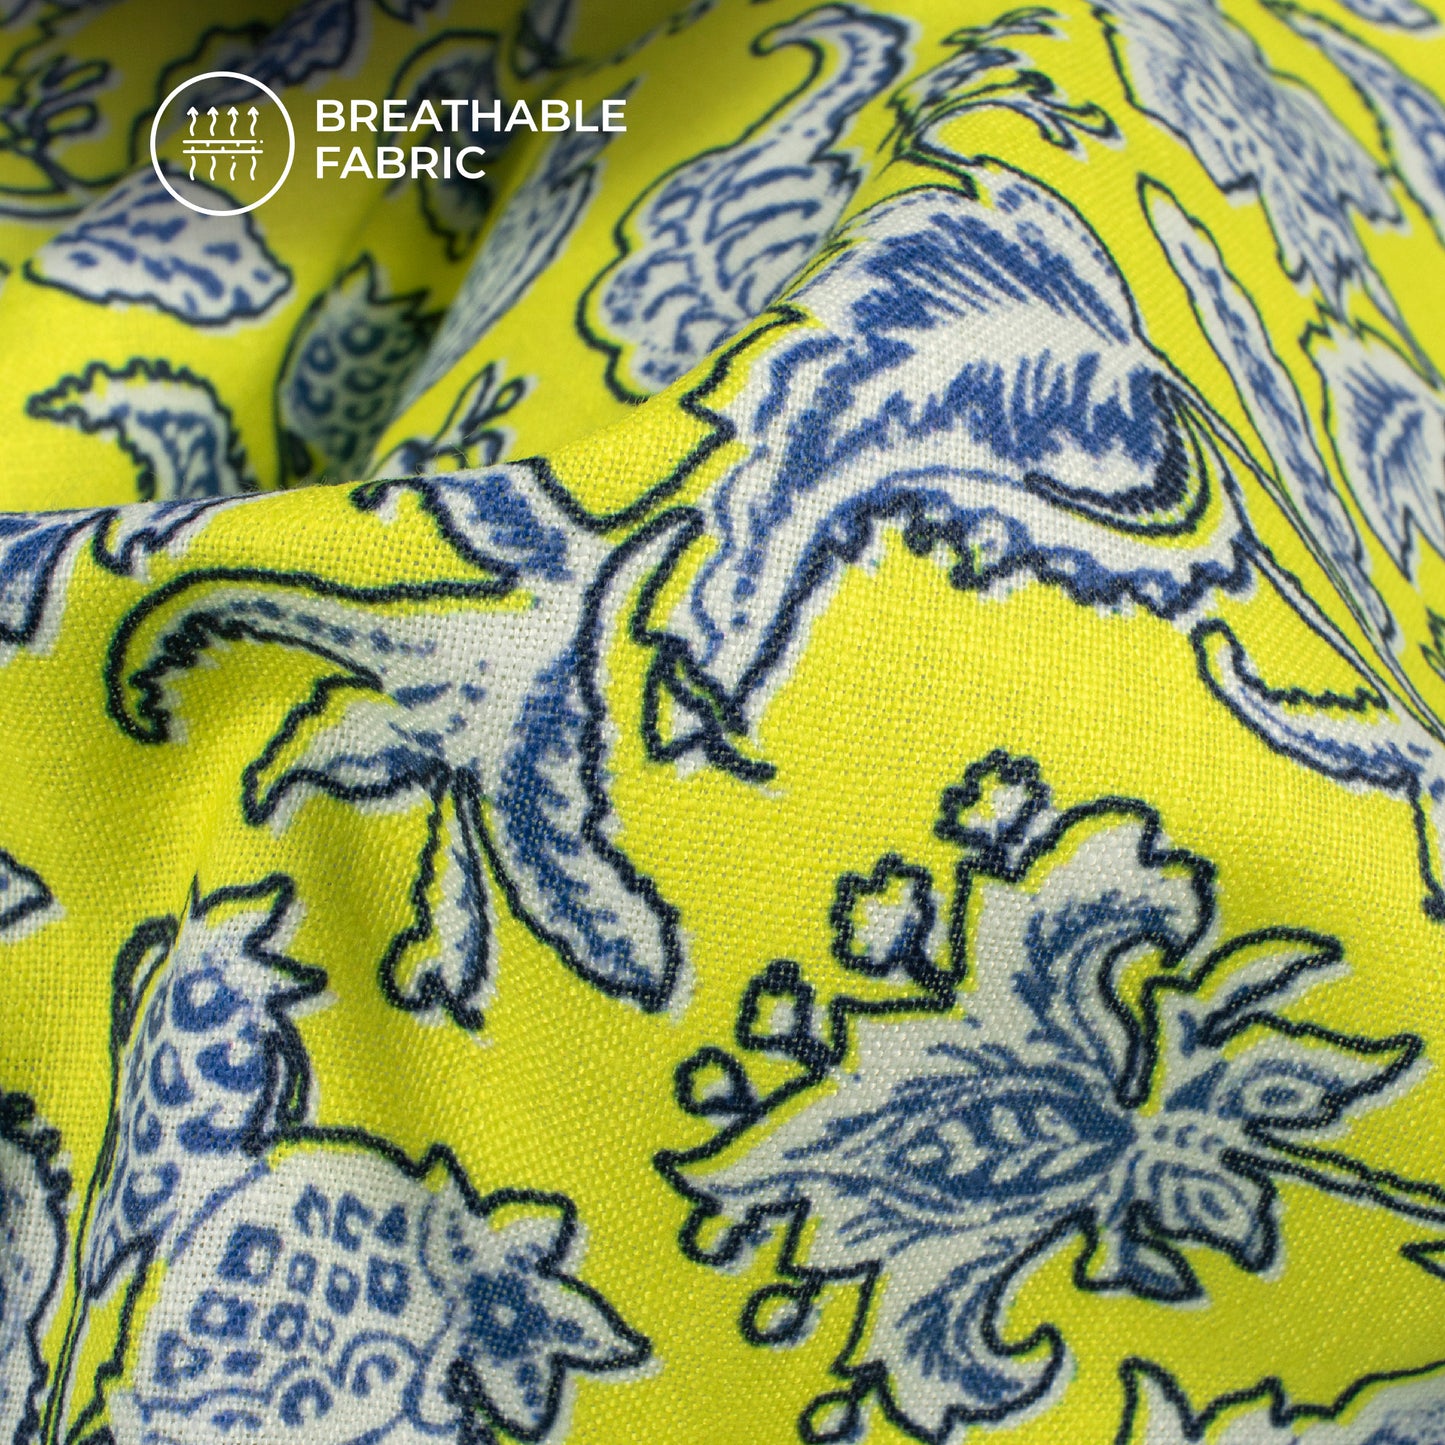 Chartreuse Yellow Floral Digital Print Linen Textured Fabric (Width 56 Inches)